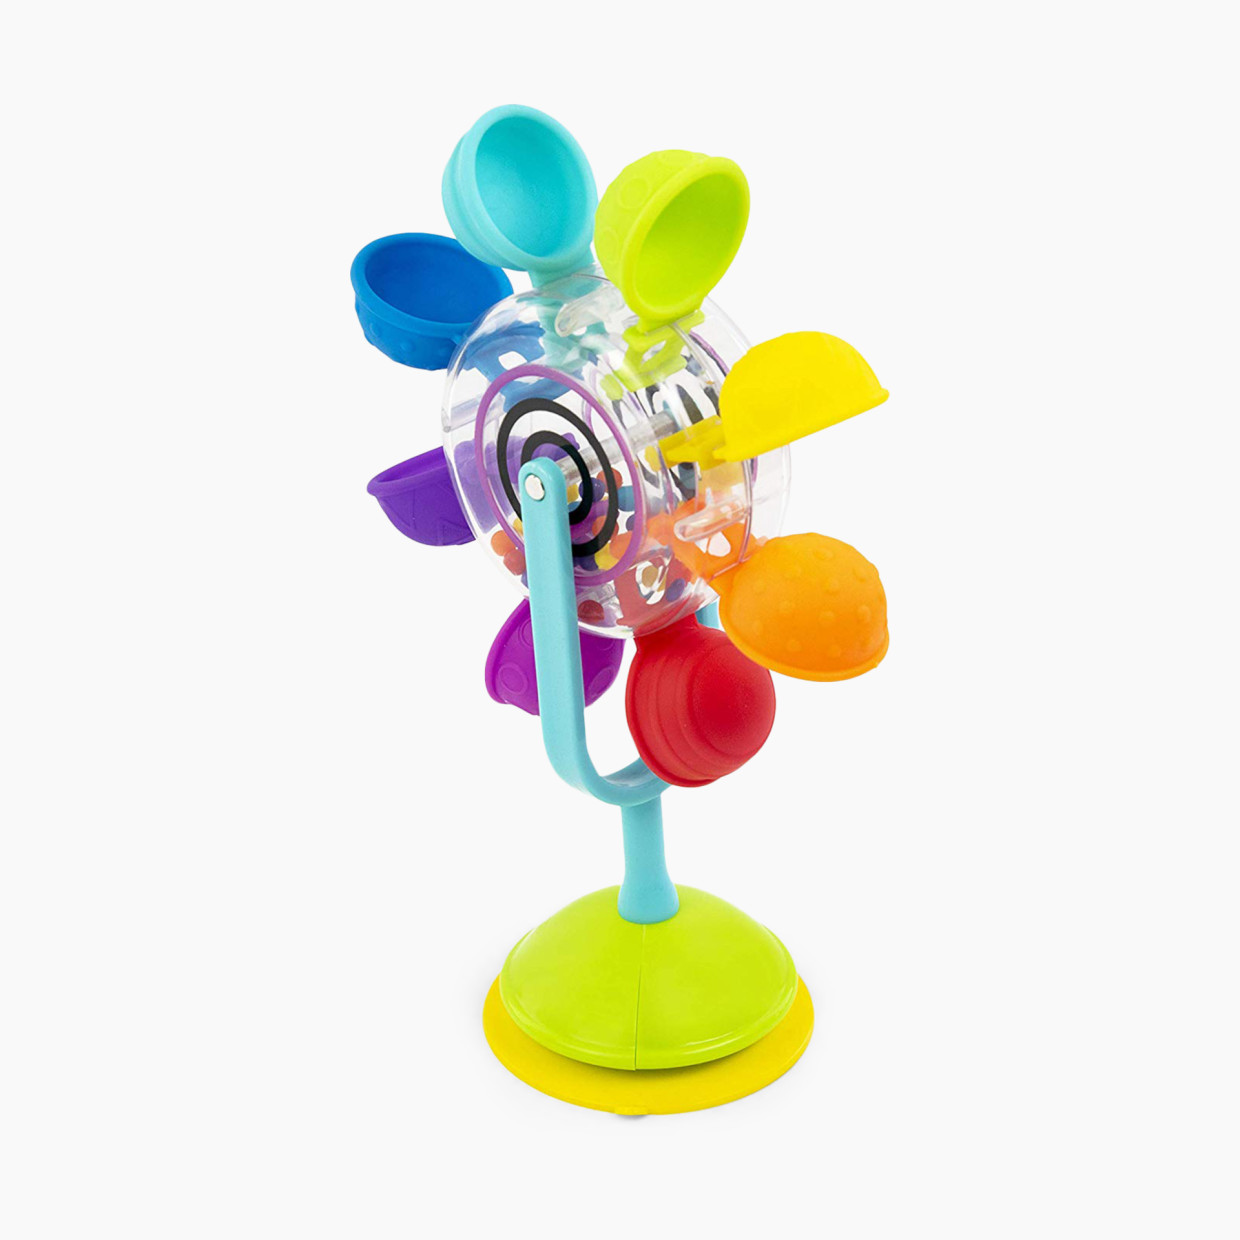 Sassy Whirling Waterfall Suction Toy.